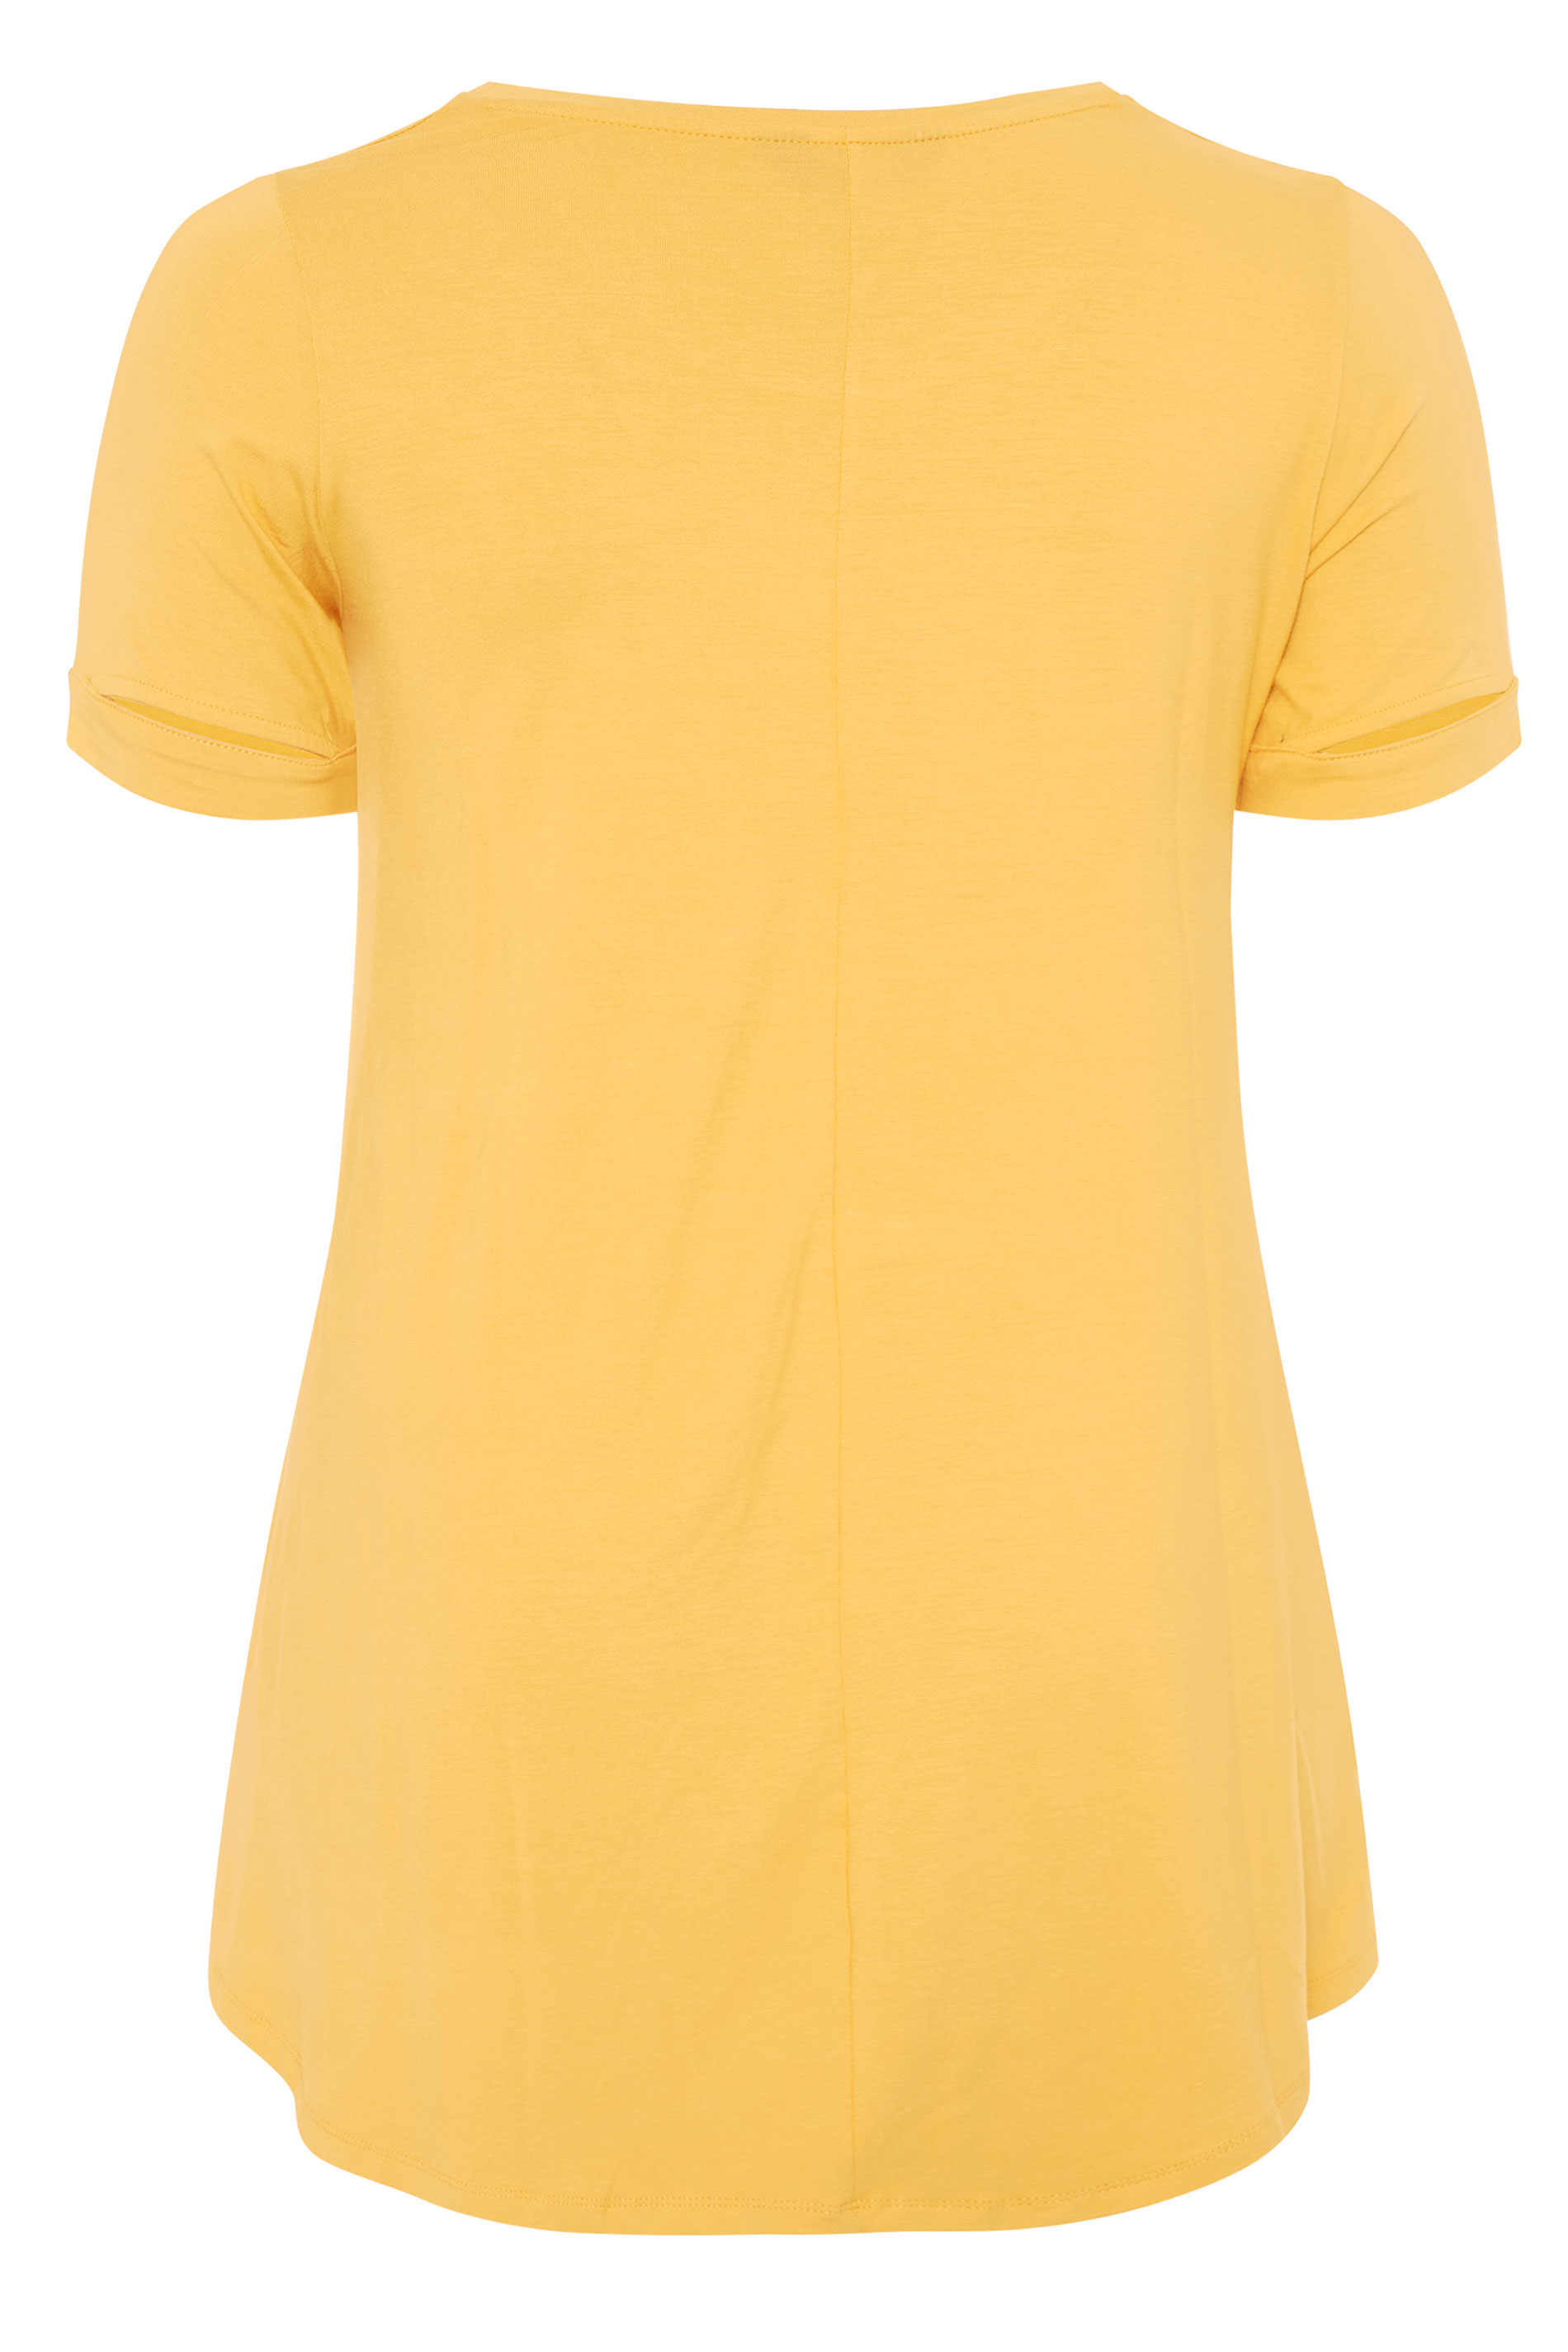 Yellow Cuff Sleeve Detail T-Shirt | Yours Clothing